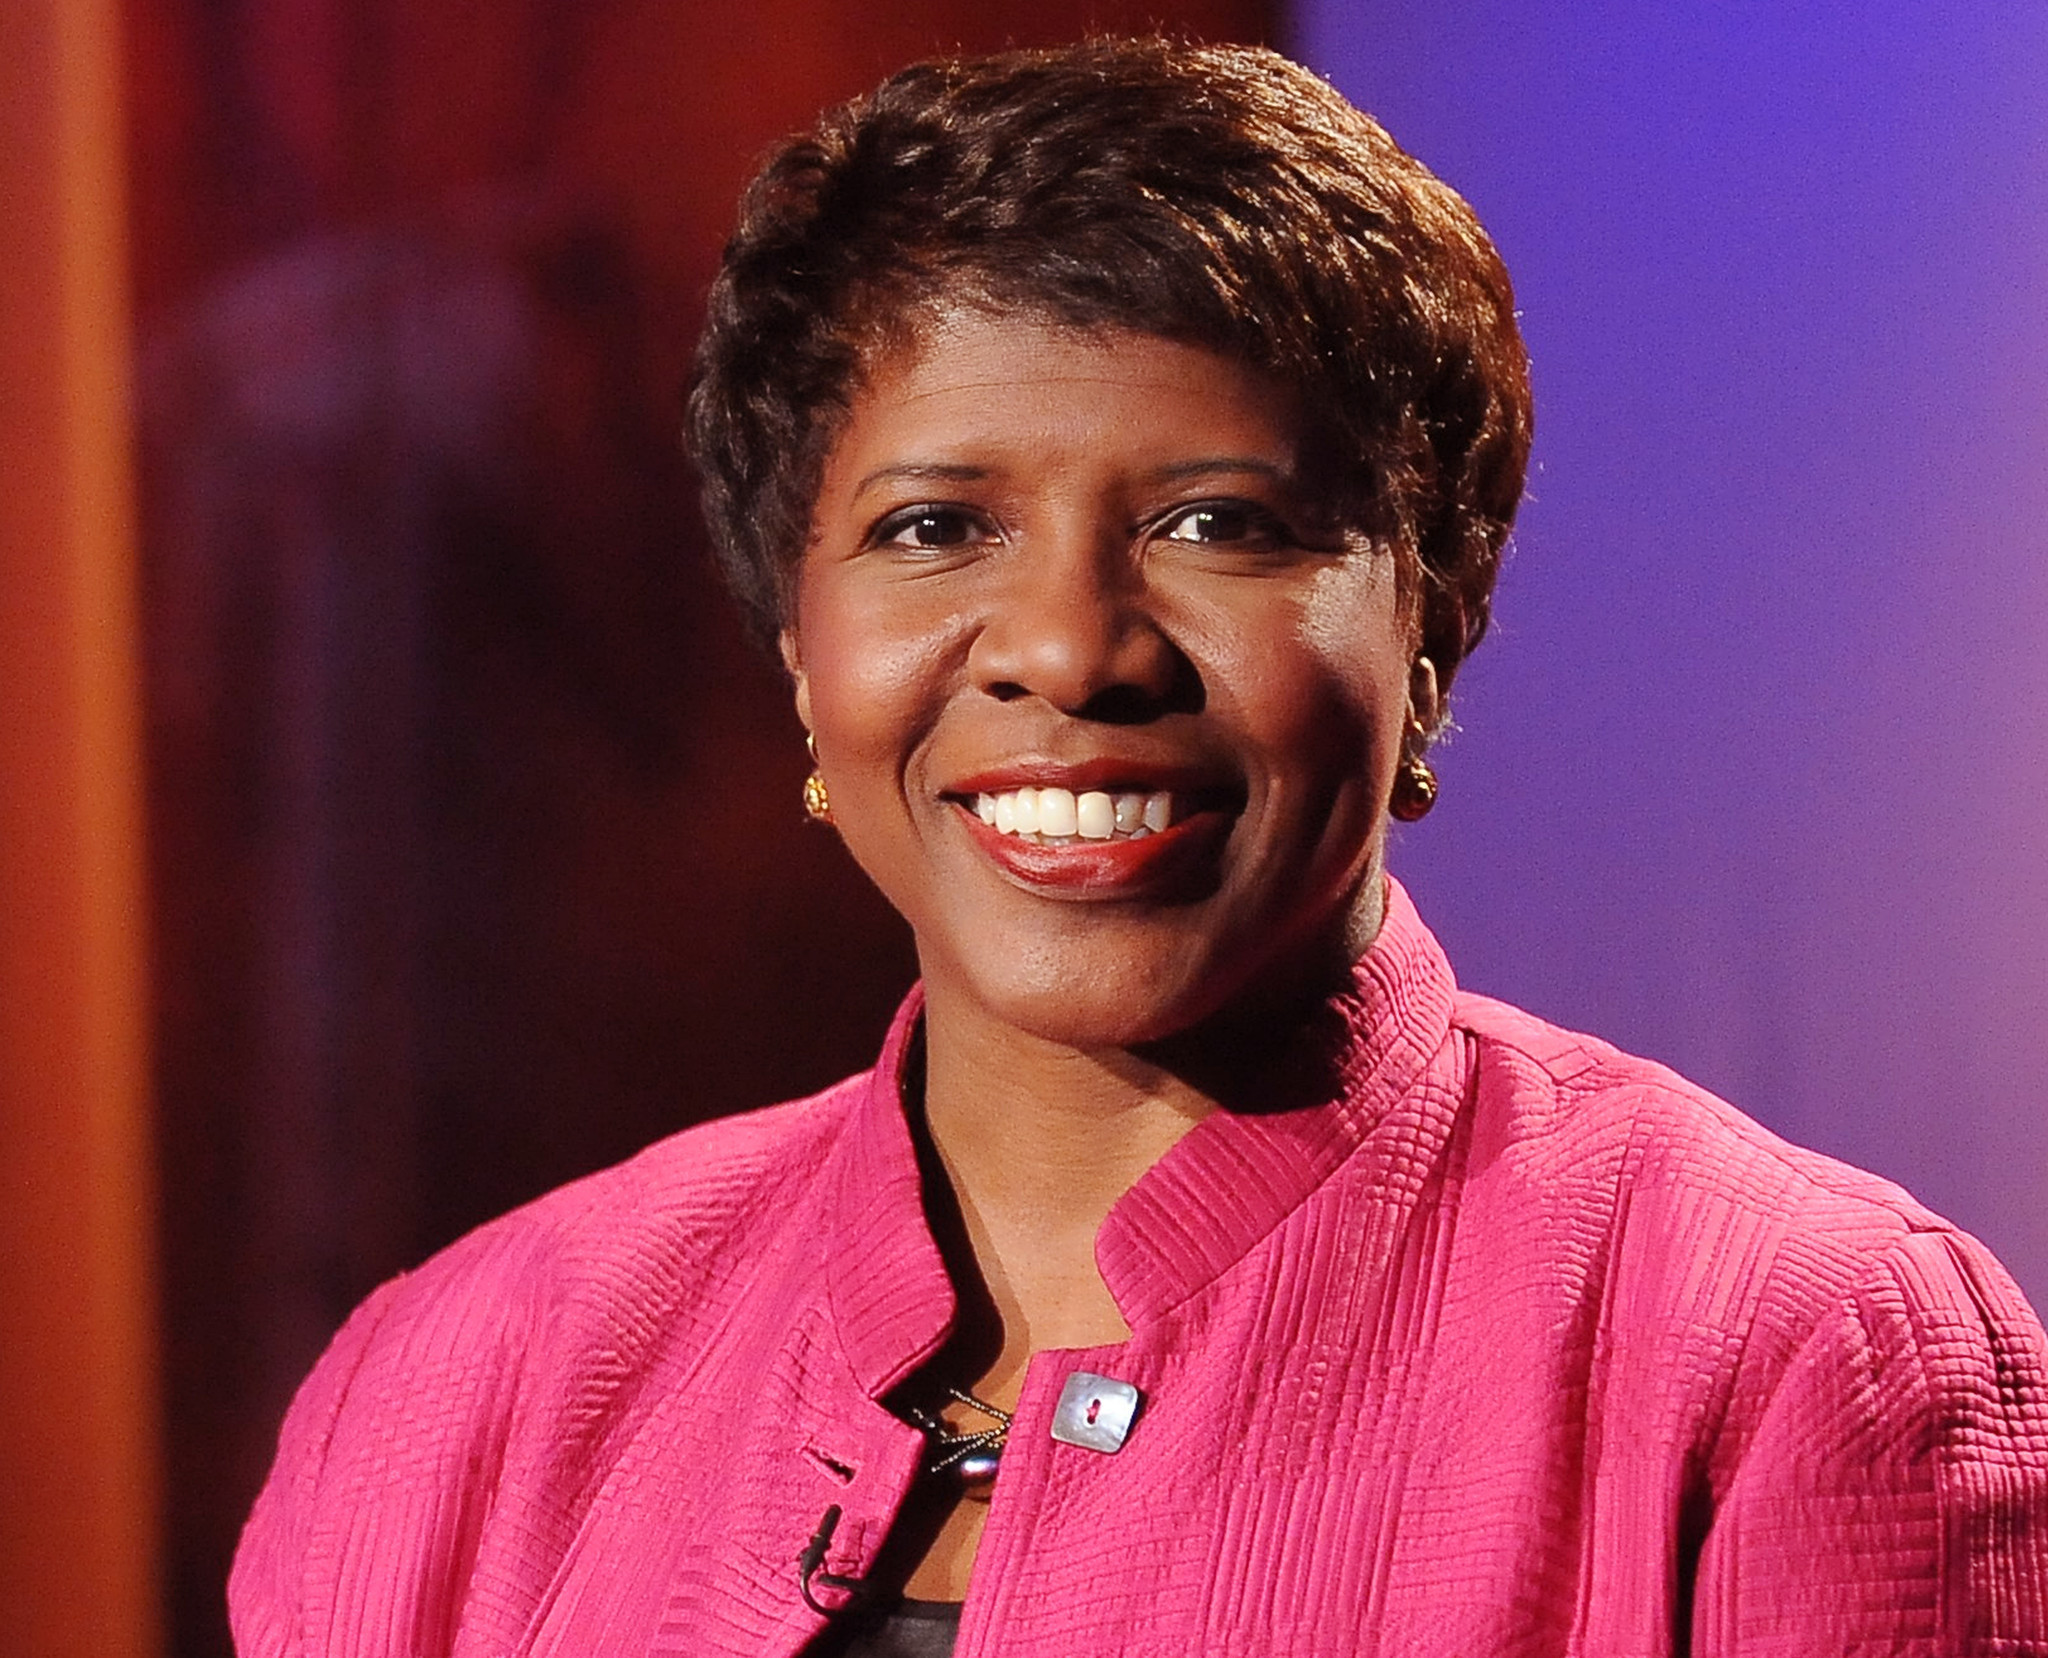 Gwen Ifill, pioneering broadcaster, PBS host, dies at 61 - Daily Press2048 x 1658